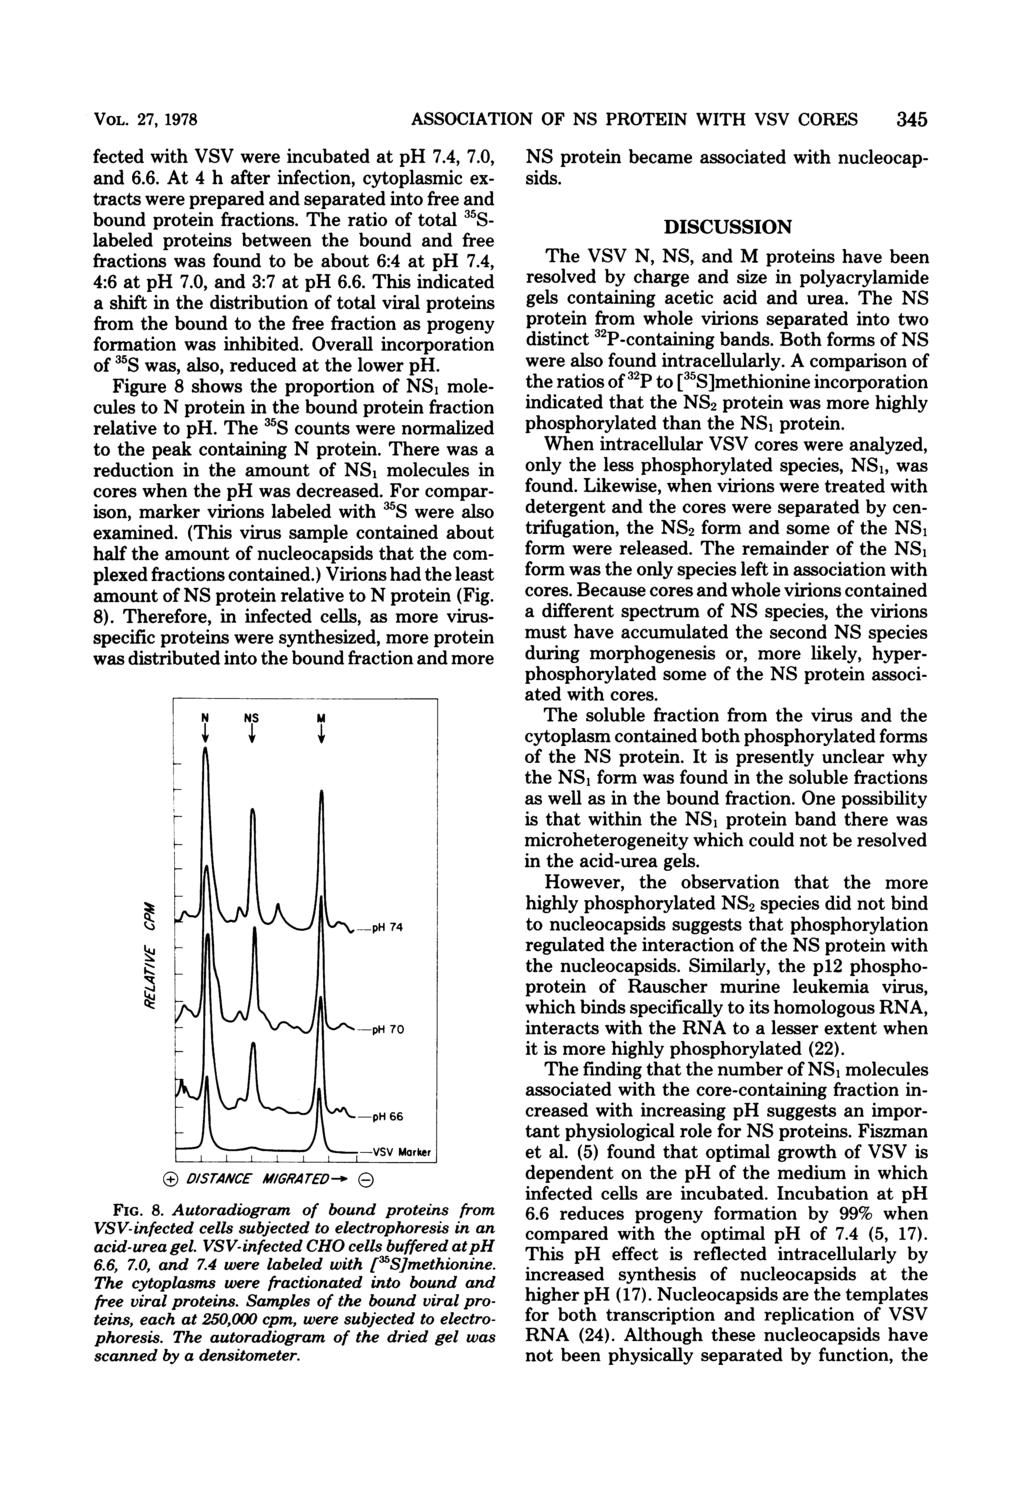 VOL. 27, 1978 fected with VSV were incubated at ph 7.4, 7.0, and 6.6. At 4 h after infection, cytoplasmic extracts were prepared and separated into free and bound protein fractions.